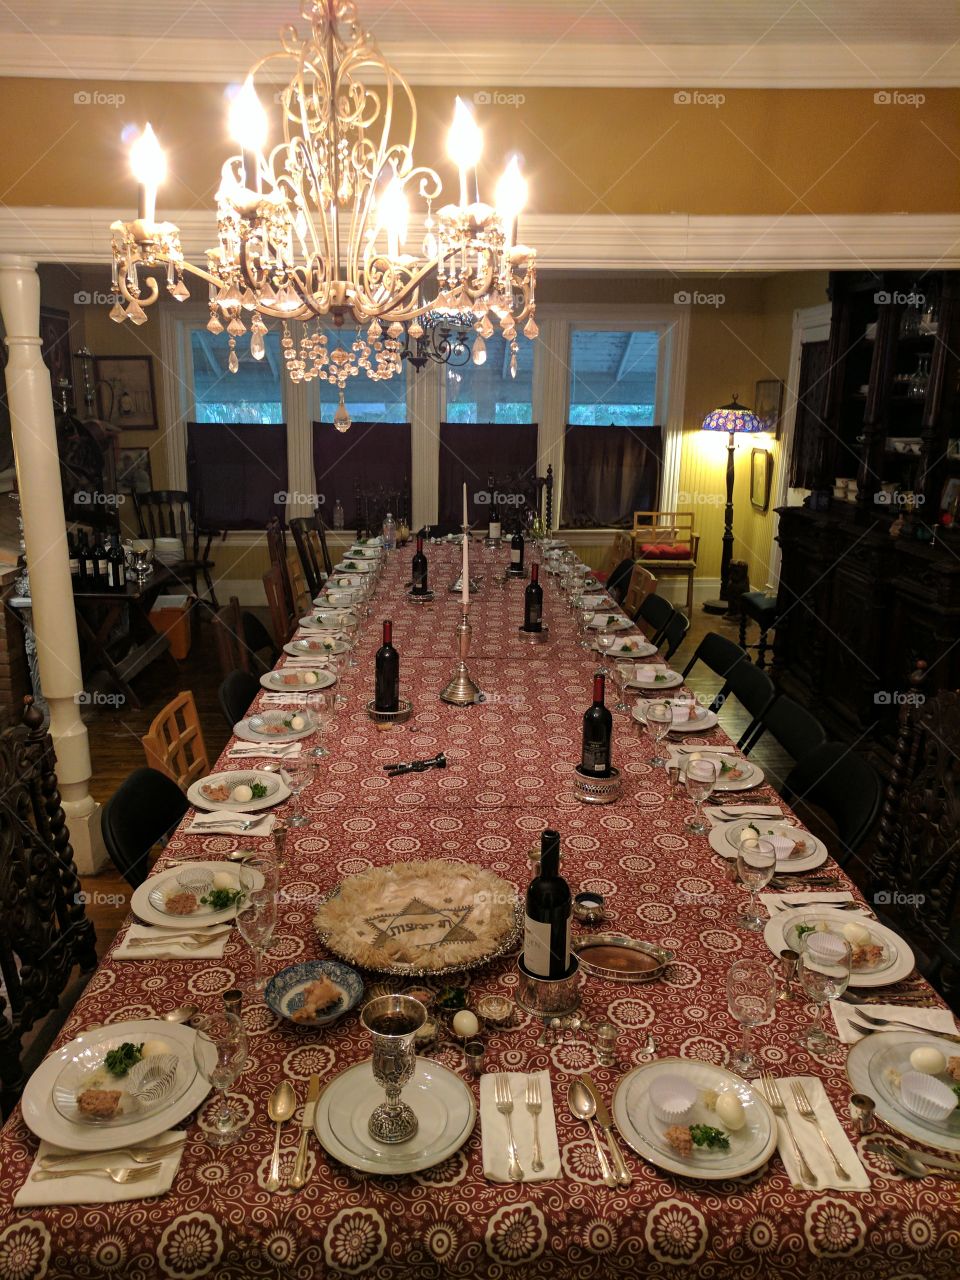 ready for Passover